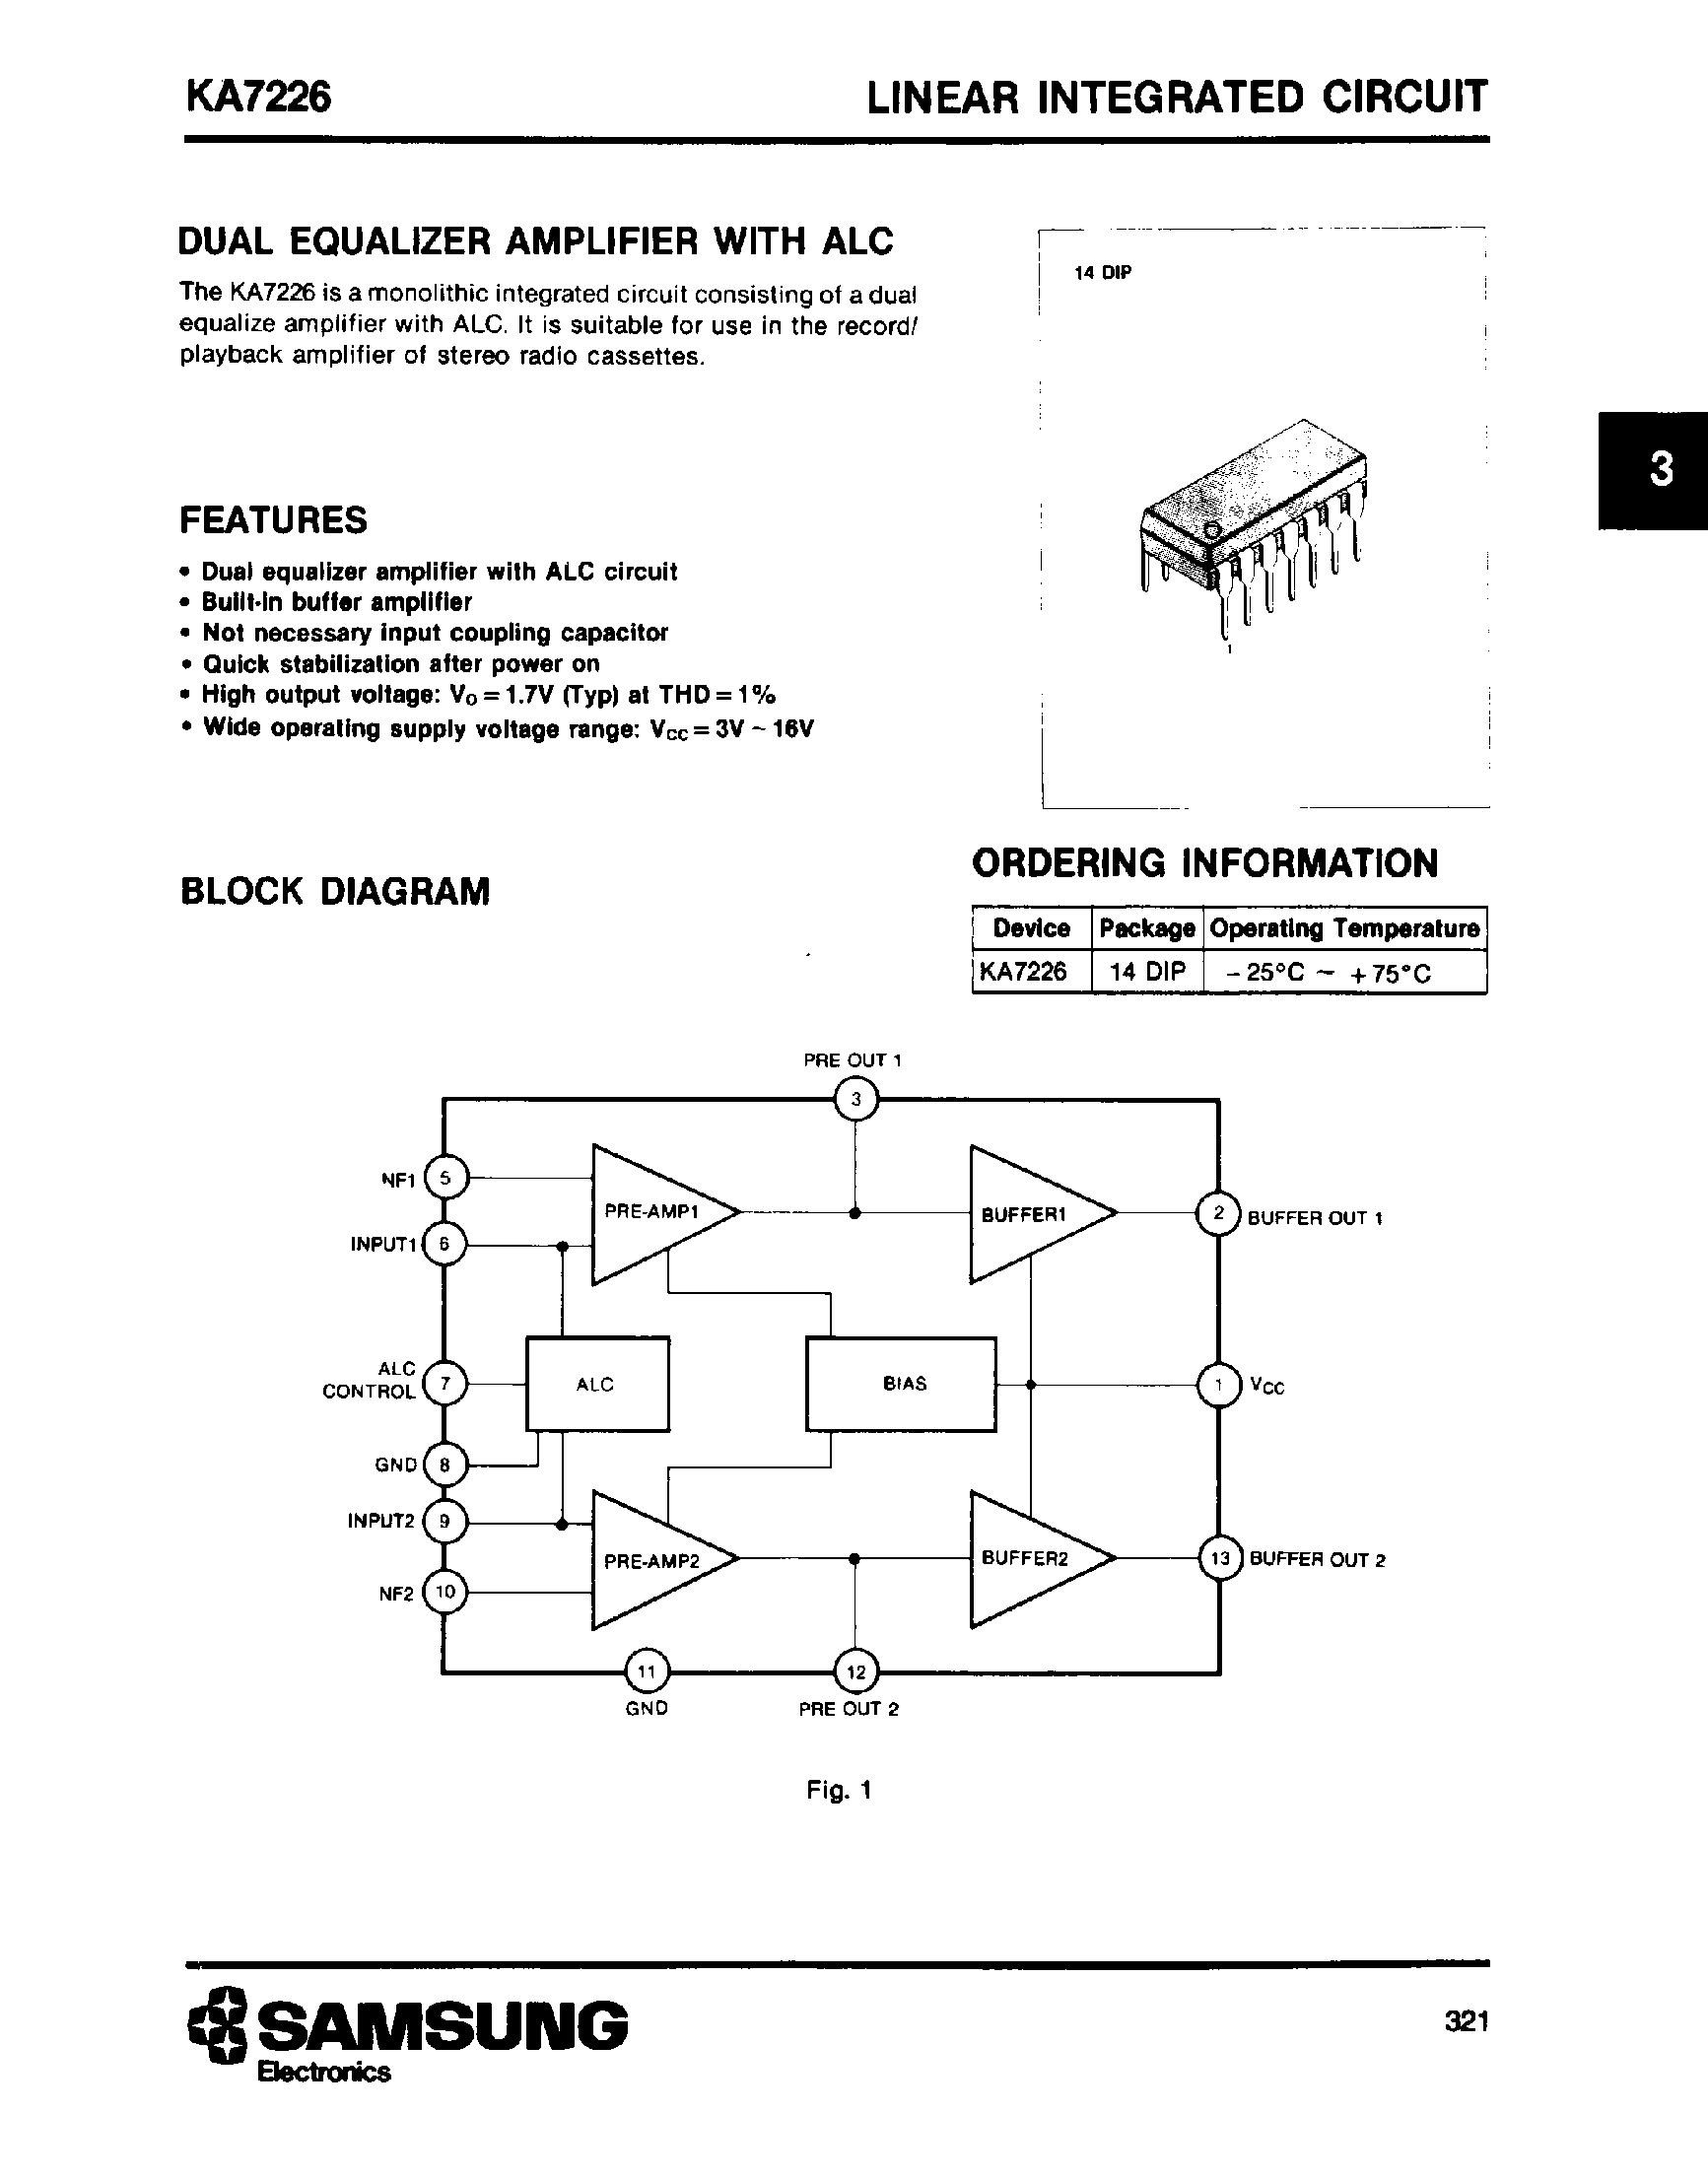 Datasheet KA7226 - DUAL EQUALIZER AMPLIFIER WITH ALC page 1